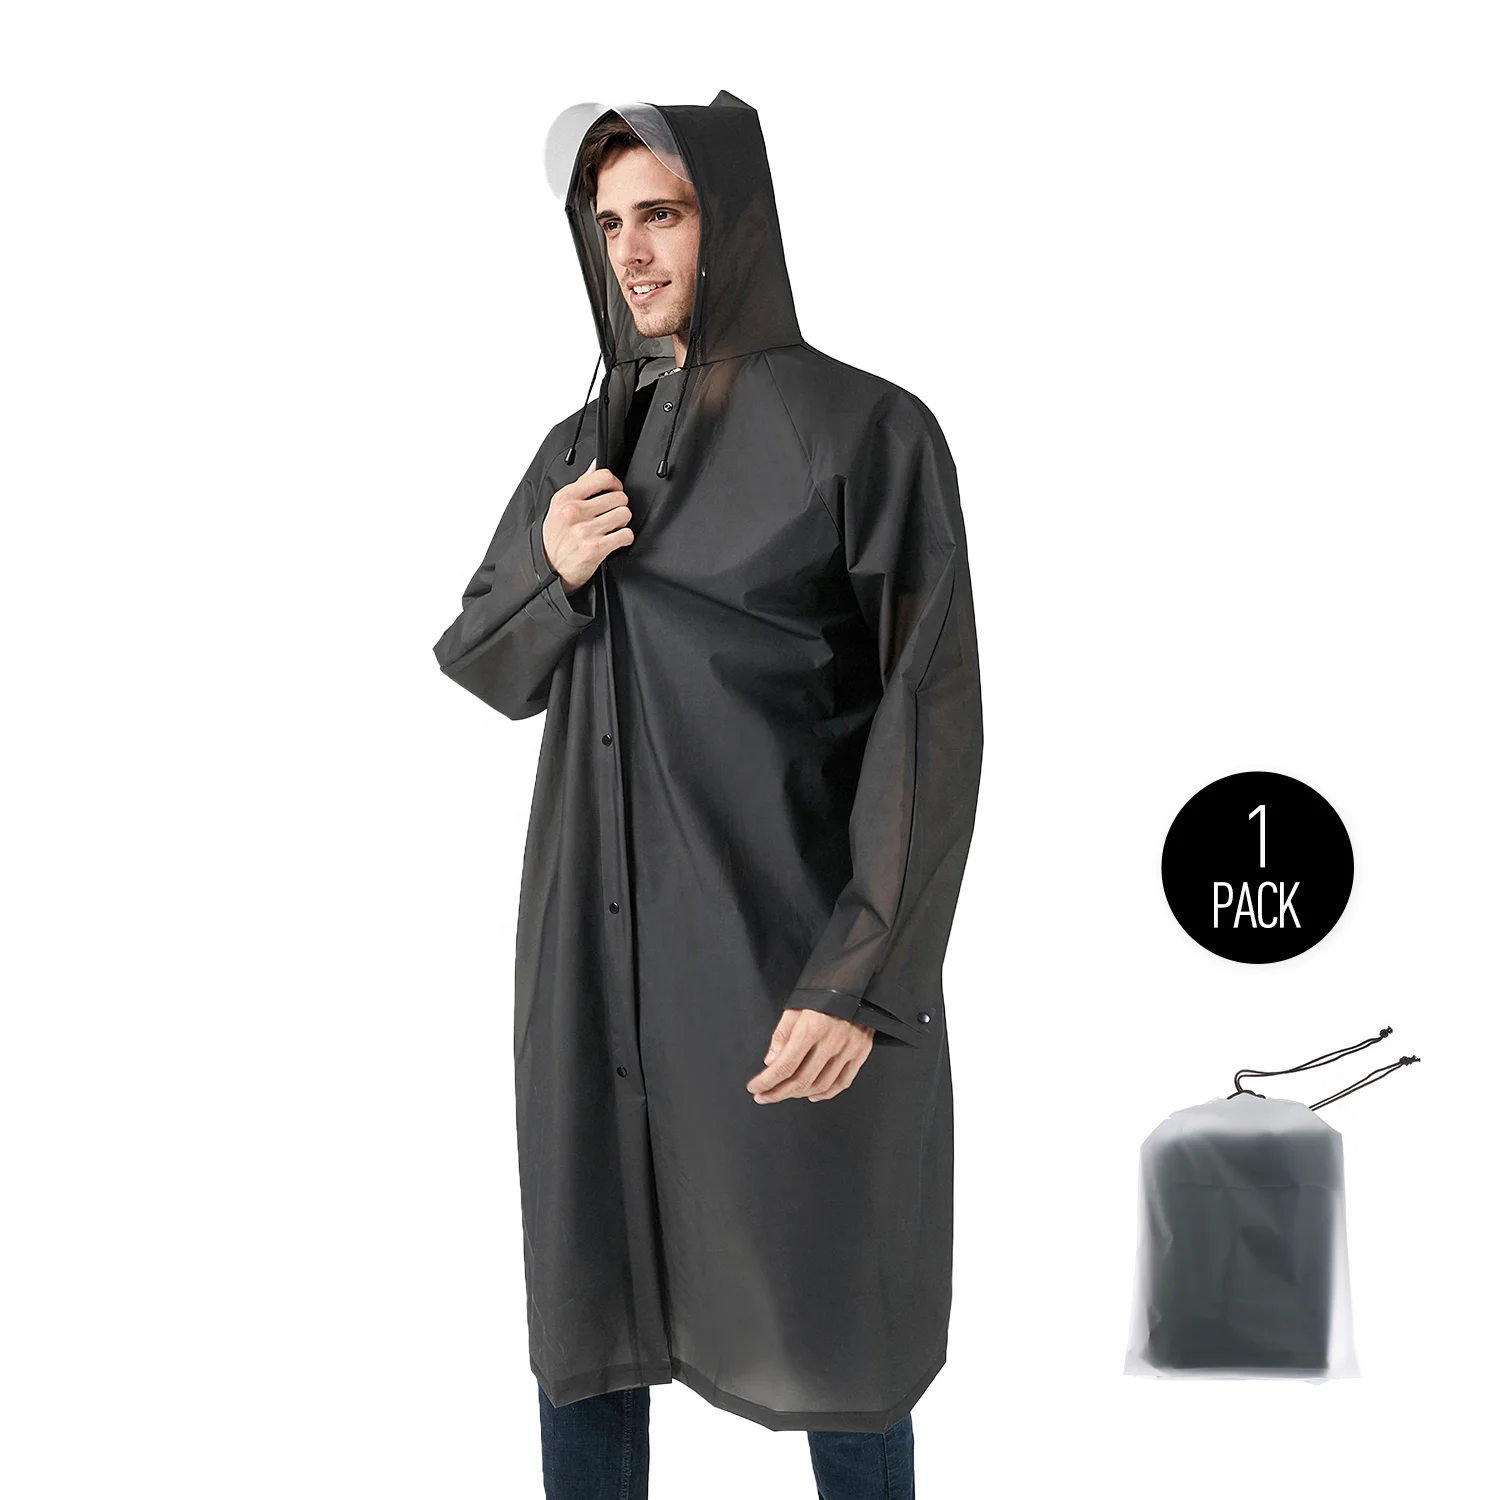 Light Weight and Tight Cuff Reusable Rain Poncho with Hoods and Sleeves EVA Portable Raincoat Non-Toxic